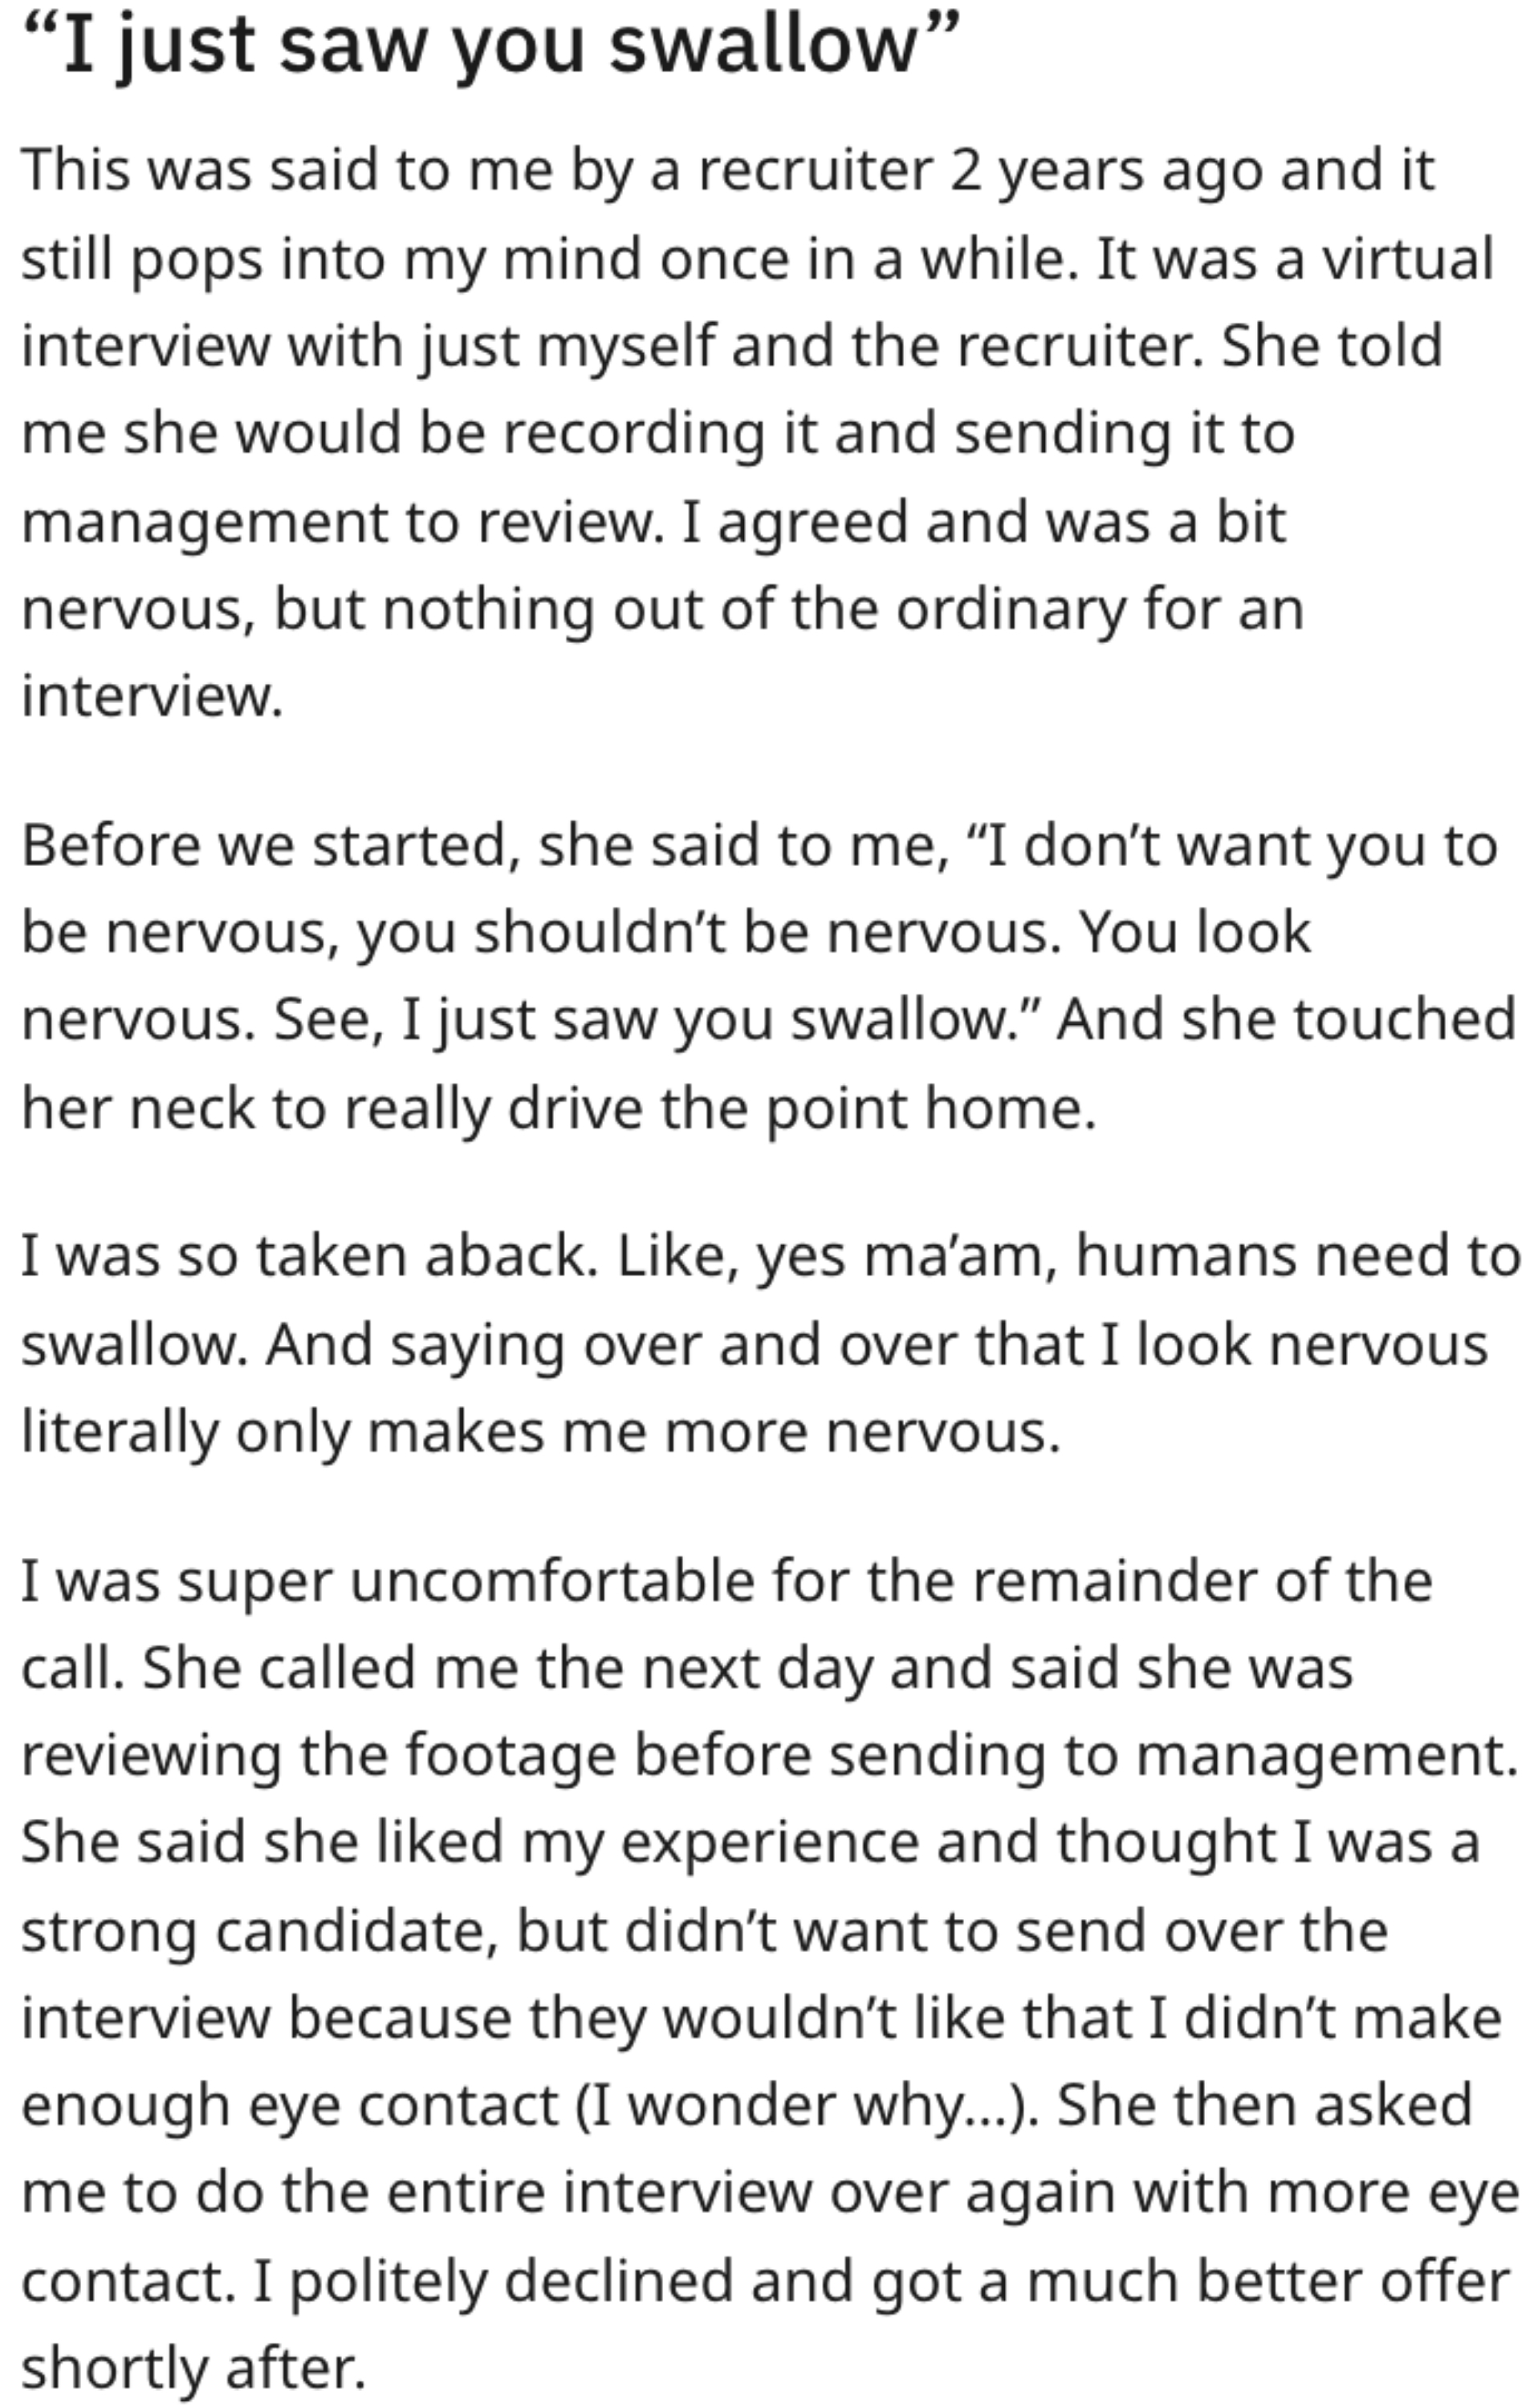 Recruiter interviewed person virtually and said they looked nervous — &quot;See, I just saw you swallow&quot; — and called the next day to say person didn&#x27;t make enough eye contact; she wanted them to do the interview again before sending the footage to management